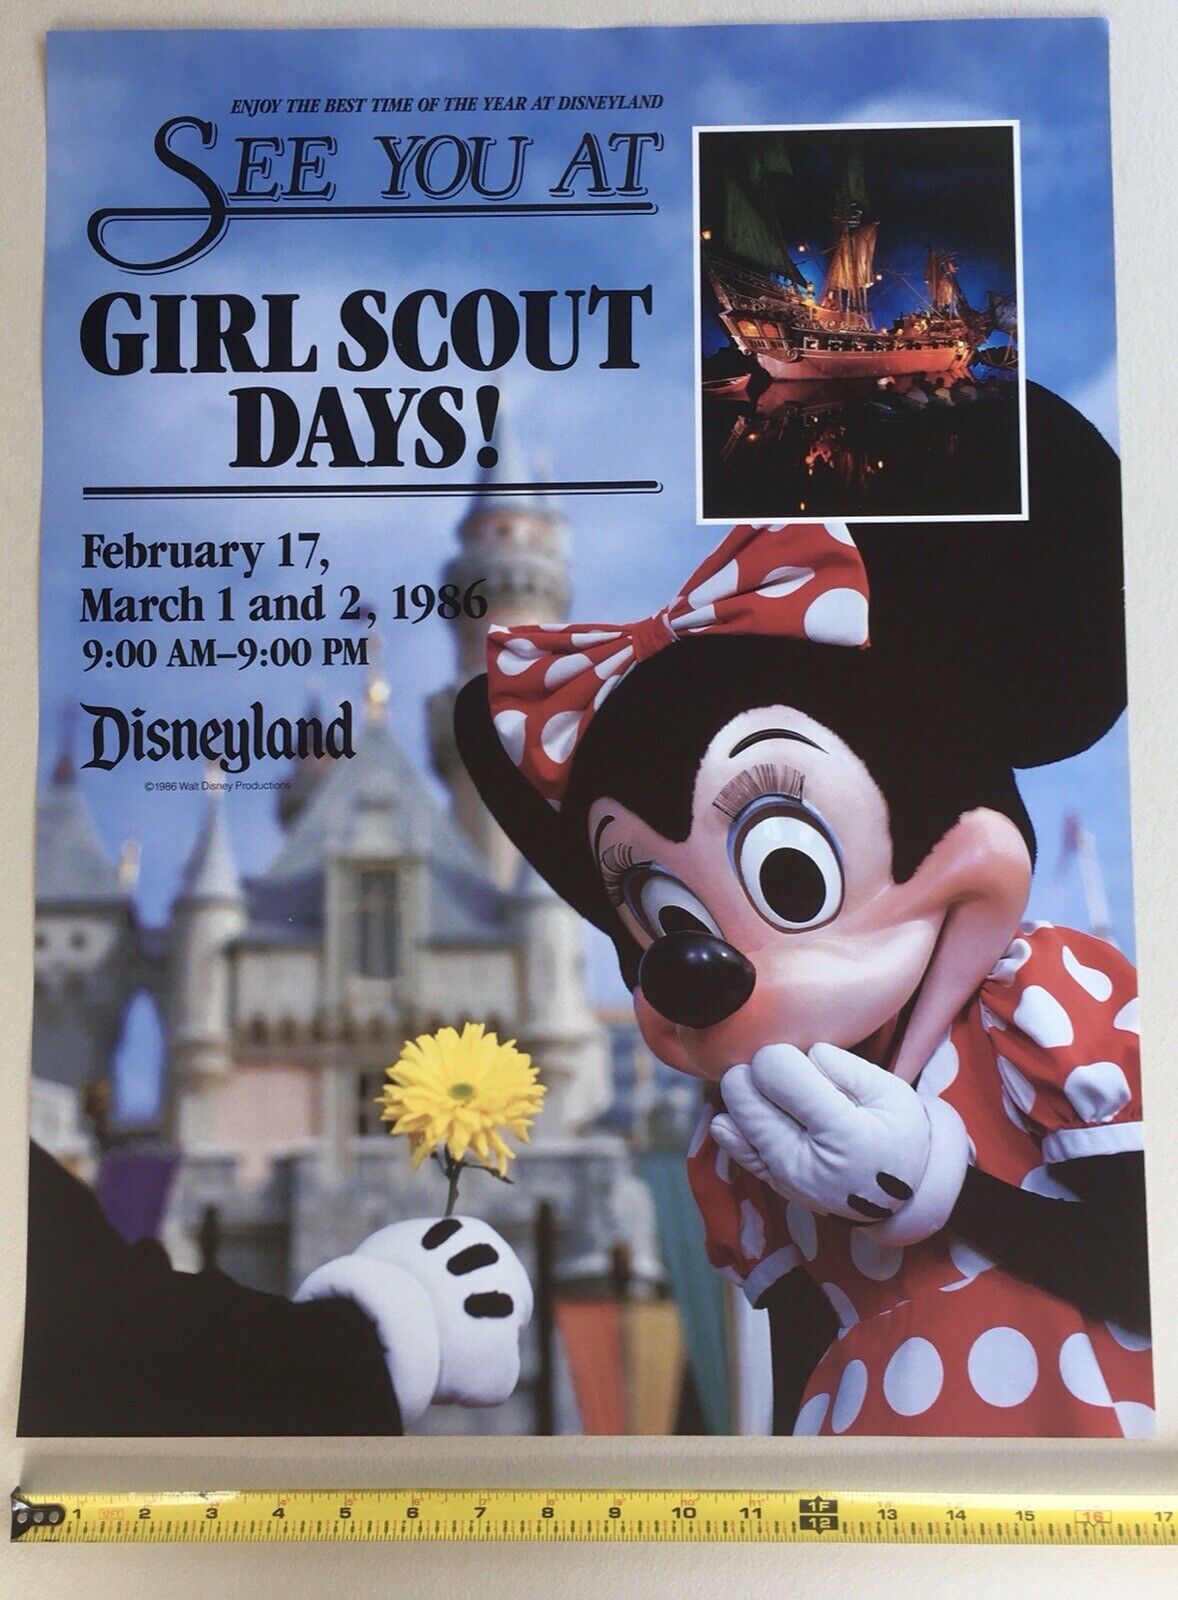 Rare 1986 Disneyland See You At Girl Scout Days Poster- Excellent Condition